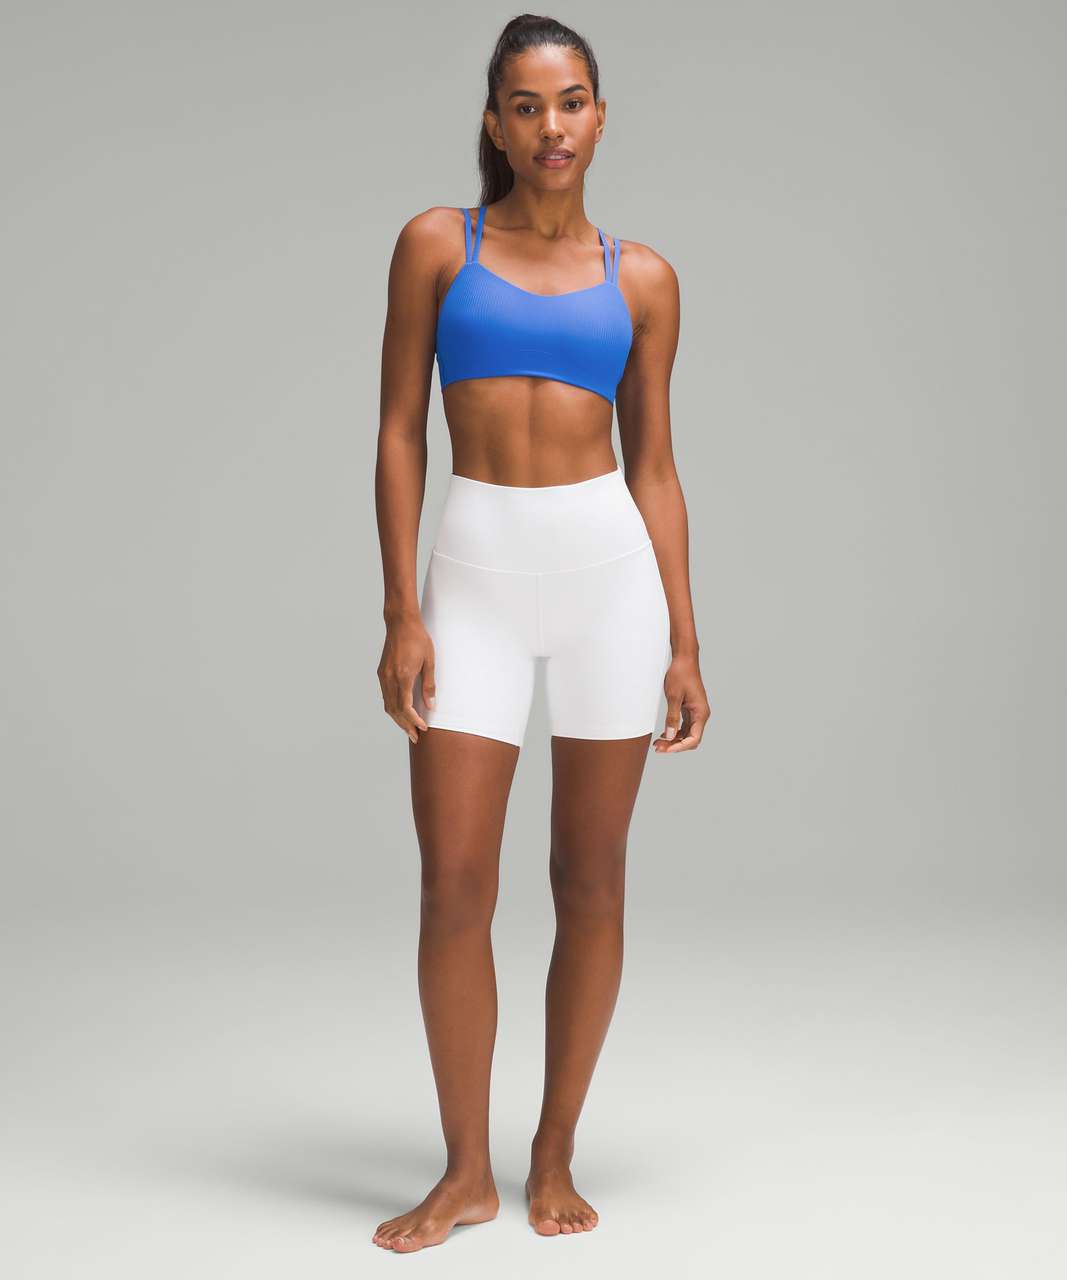 Lululemon Like a Cloud Ribbed Bra *Light Support, B/C Cup - Pipe Dream Blue